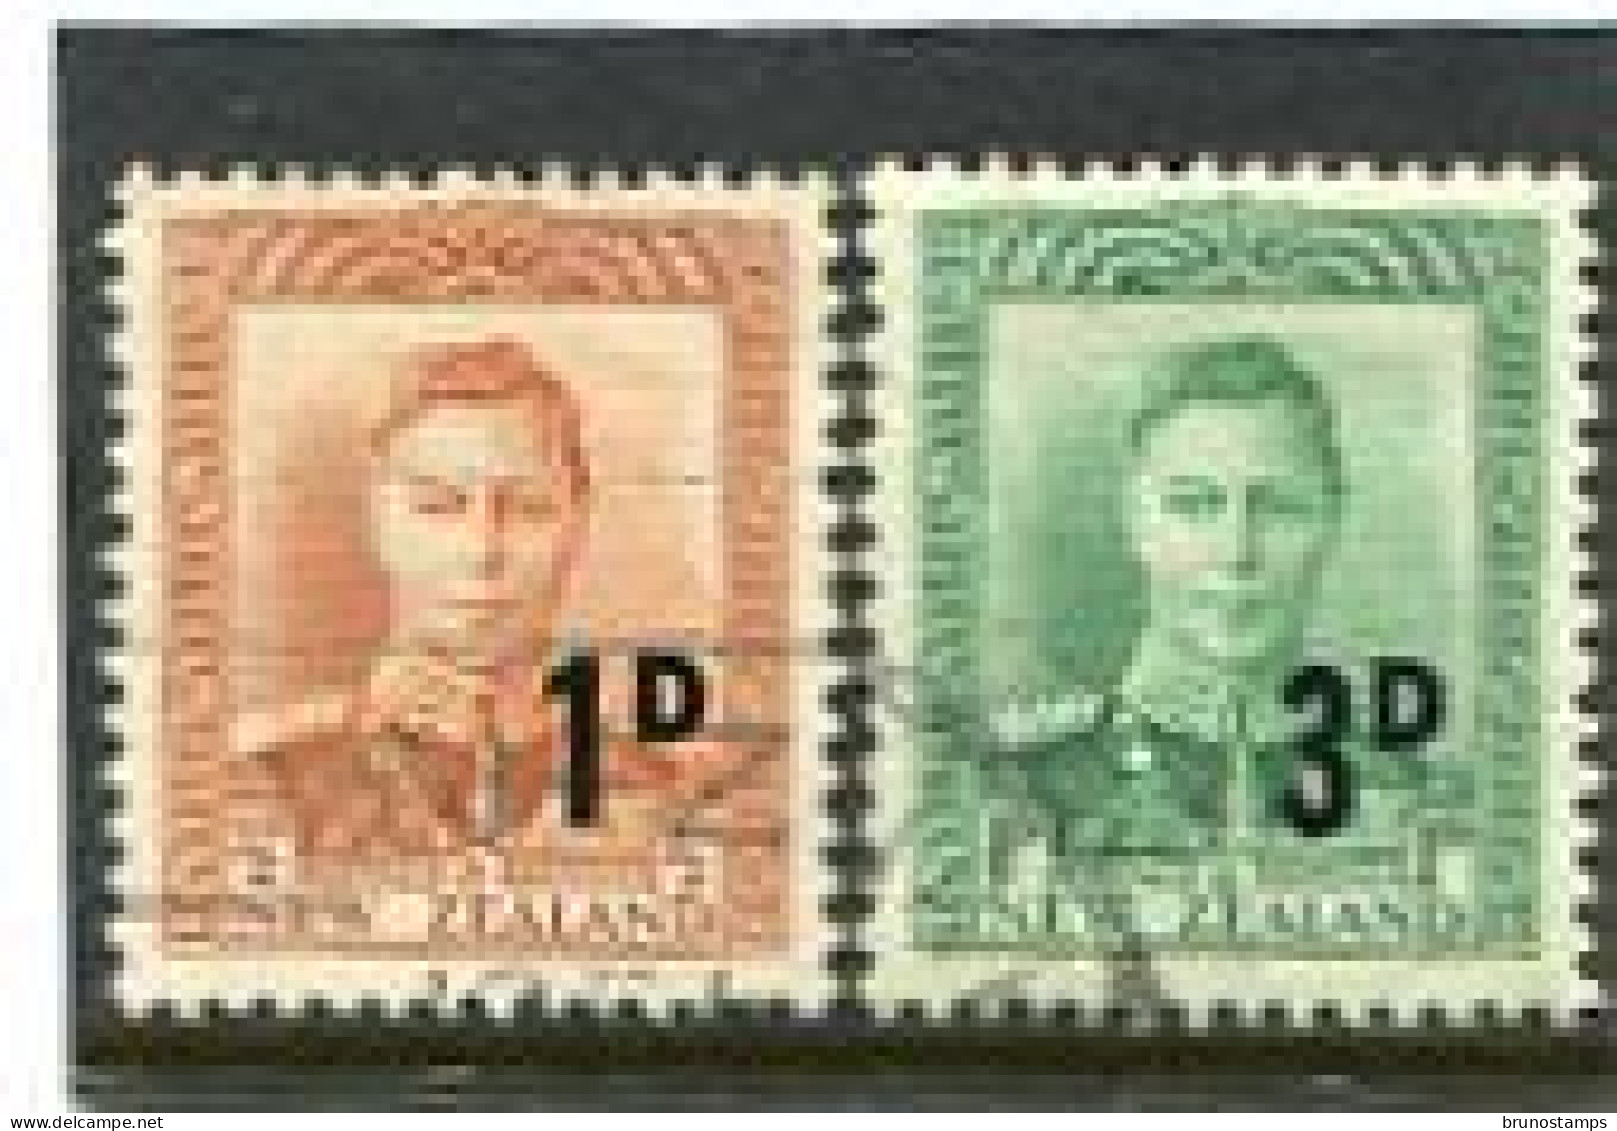 NEW ZEALAND - 1952-53  KGVI  OVERPRINTED  SET  FINE USED  SG 712/13 - Used Stamps